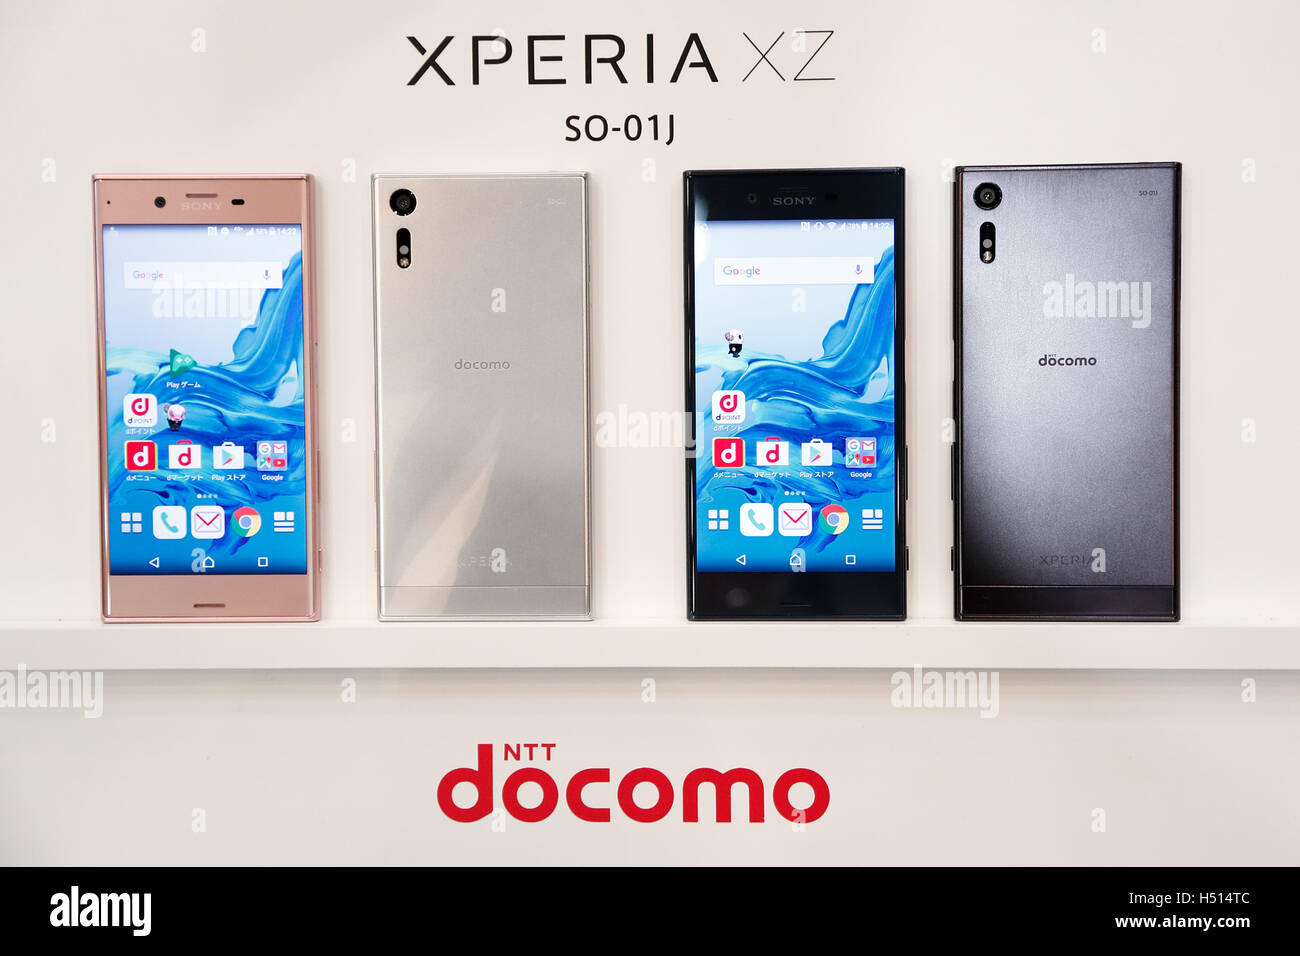 Samples of the new XPERIA XZ on display during the launch of